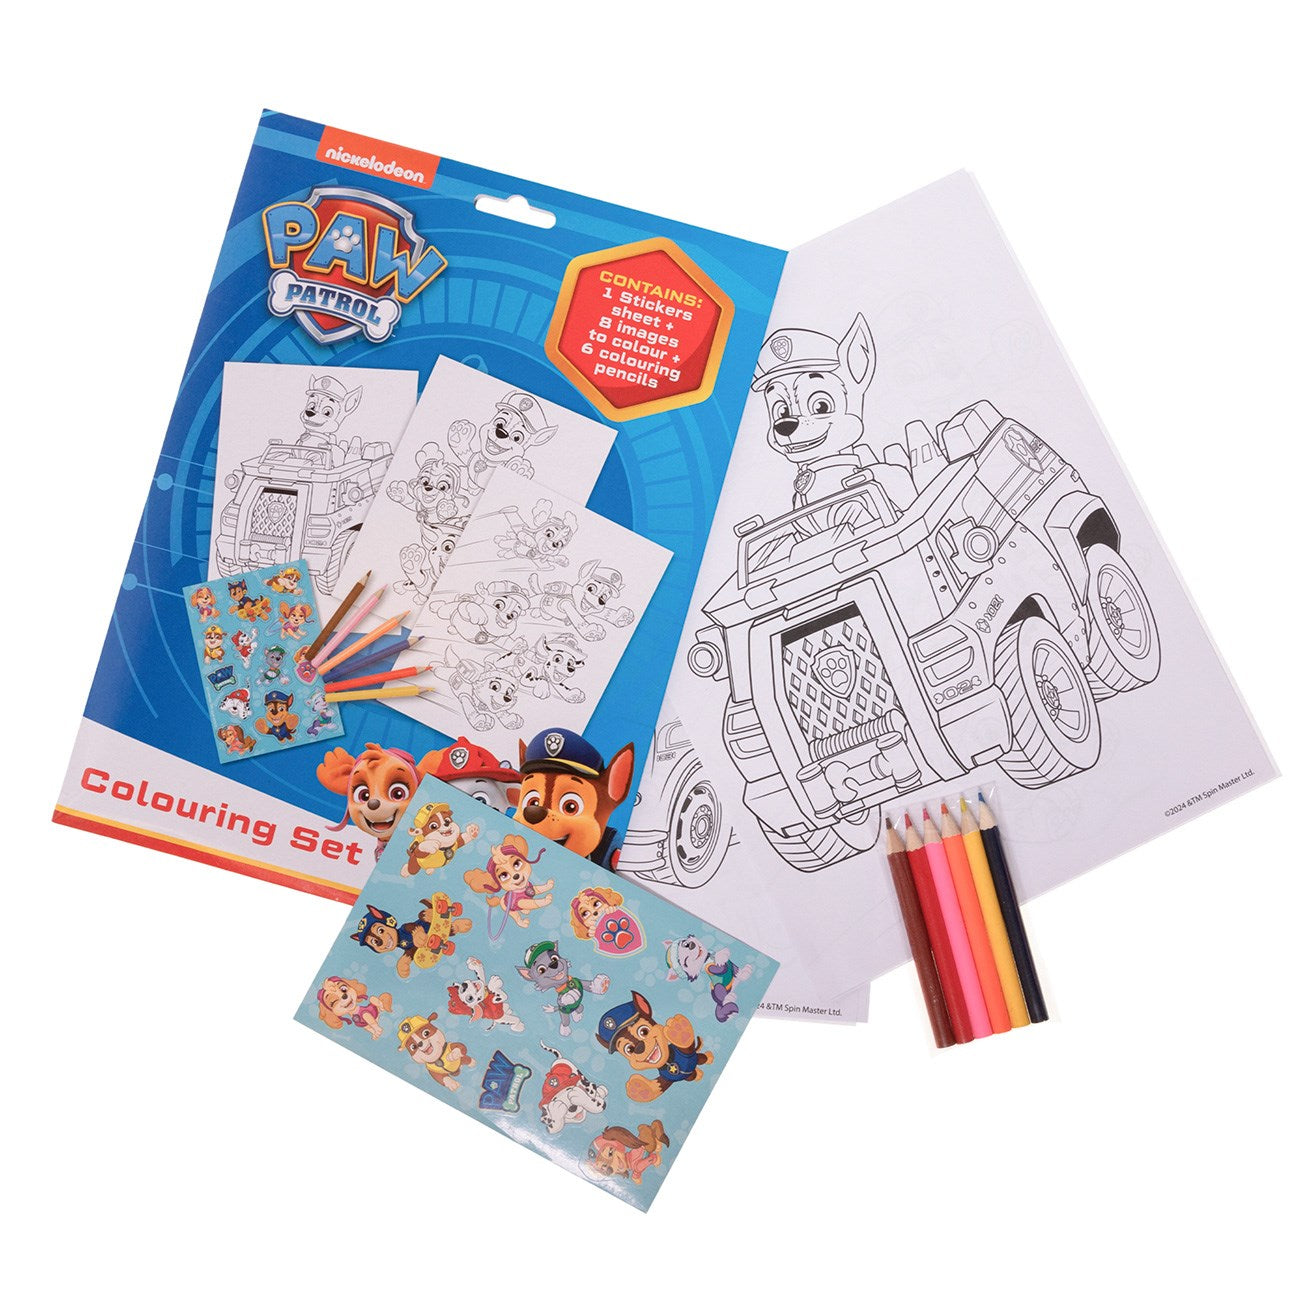 Euromic Paw Patrol Coloring Set with Coloring Pages